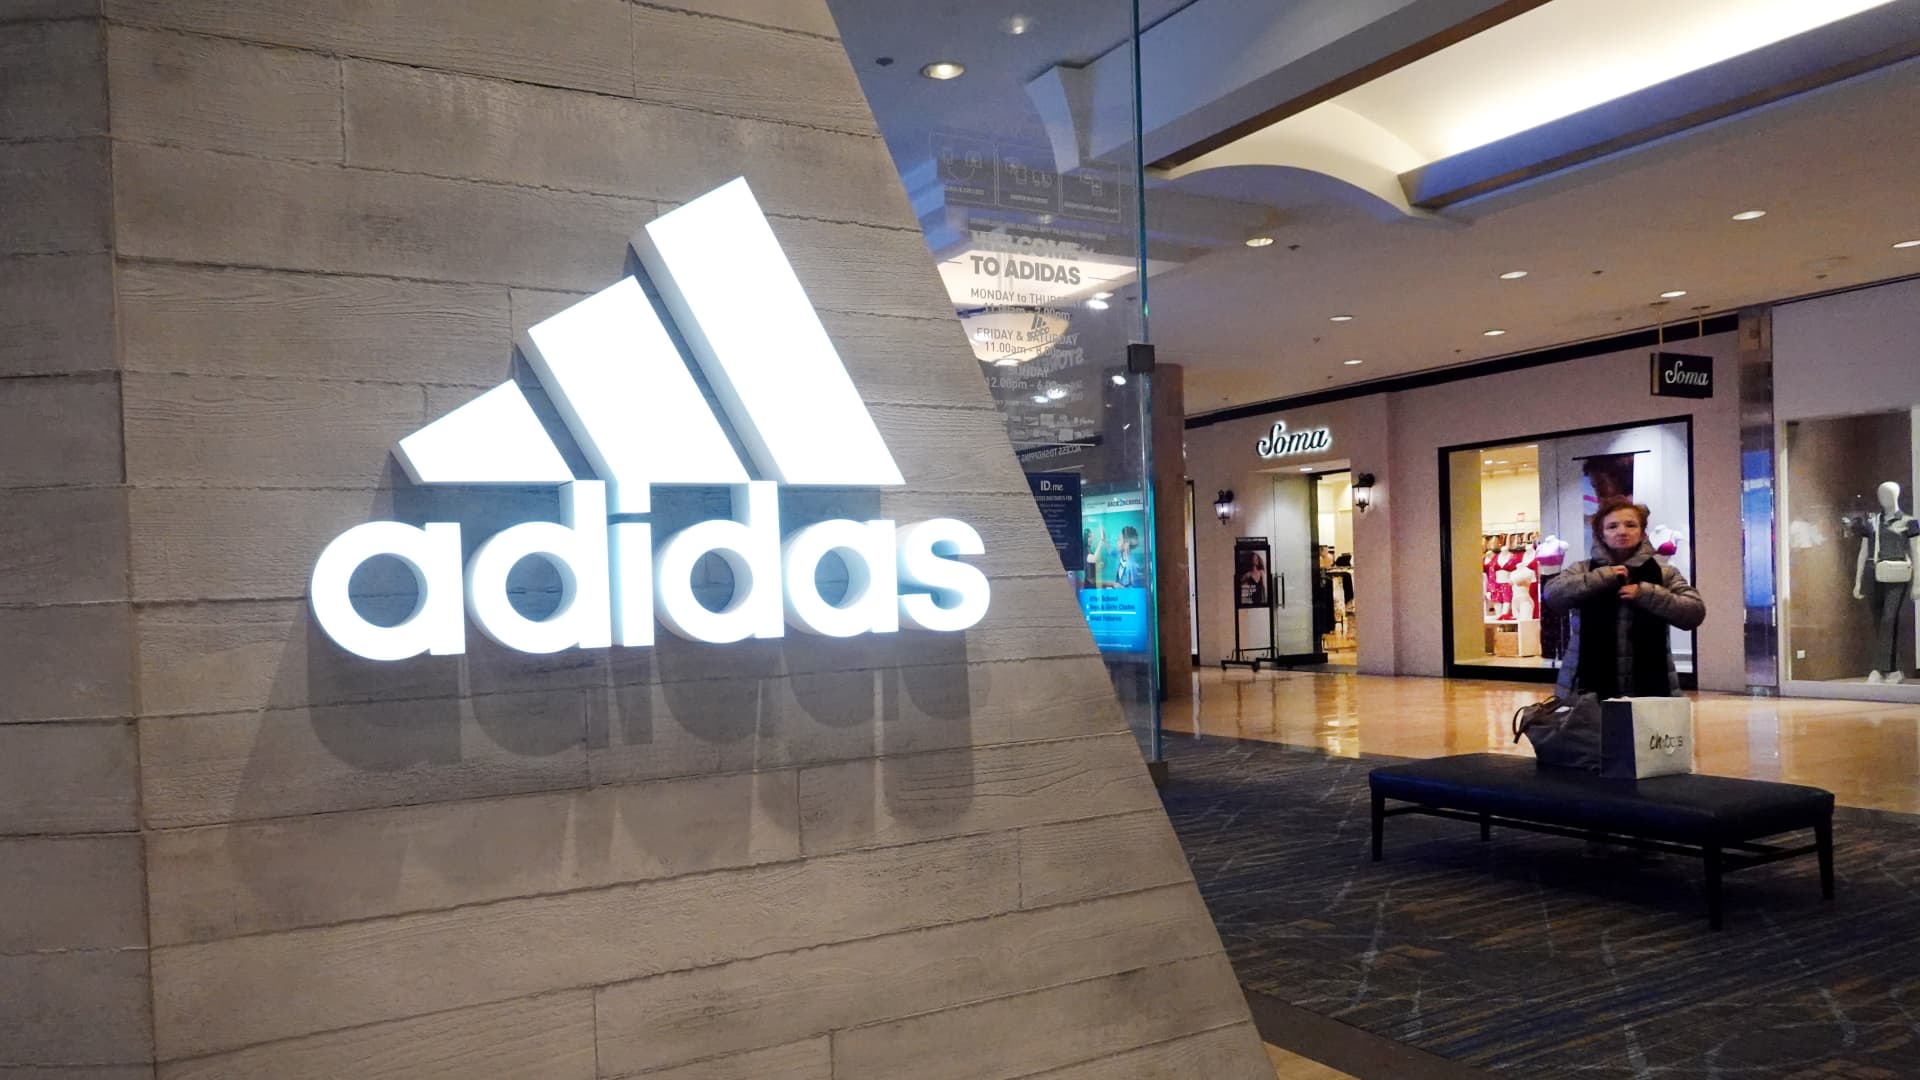 Adidas won't write off remaining Yeezy inventory, plans to sell ‘at least’ at cost